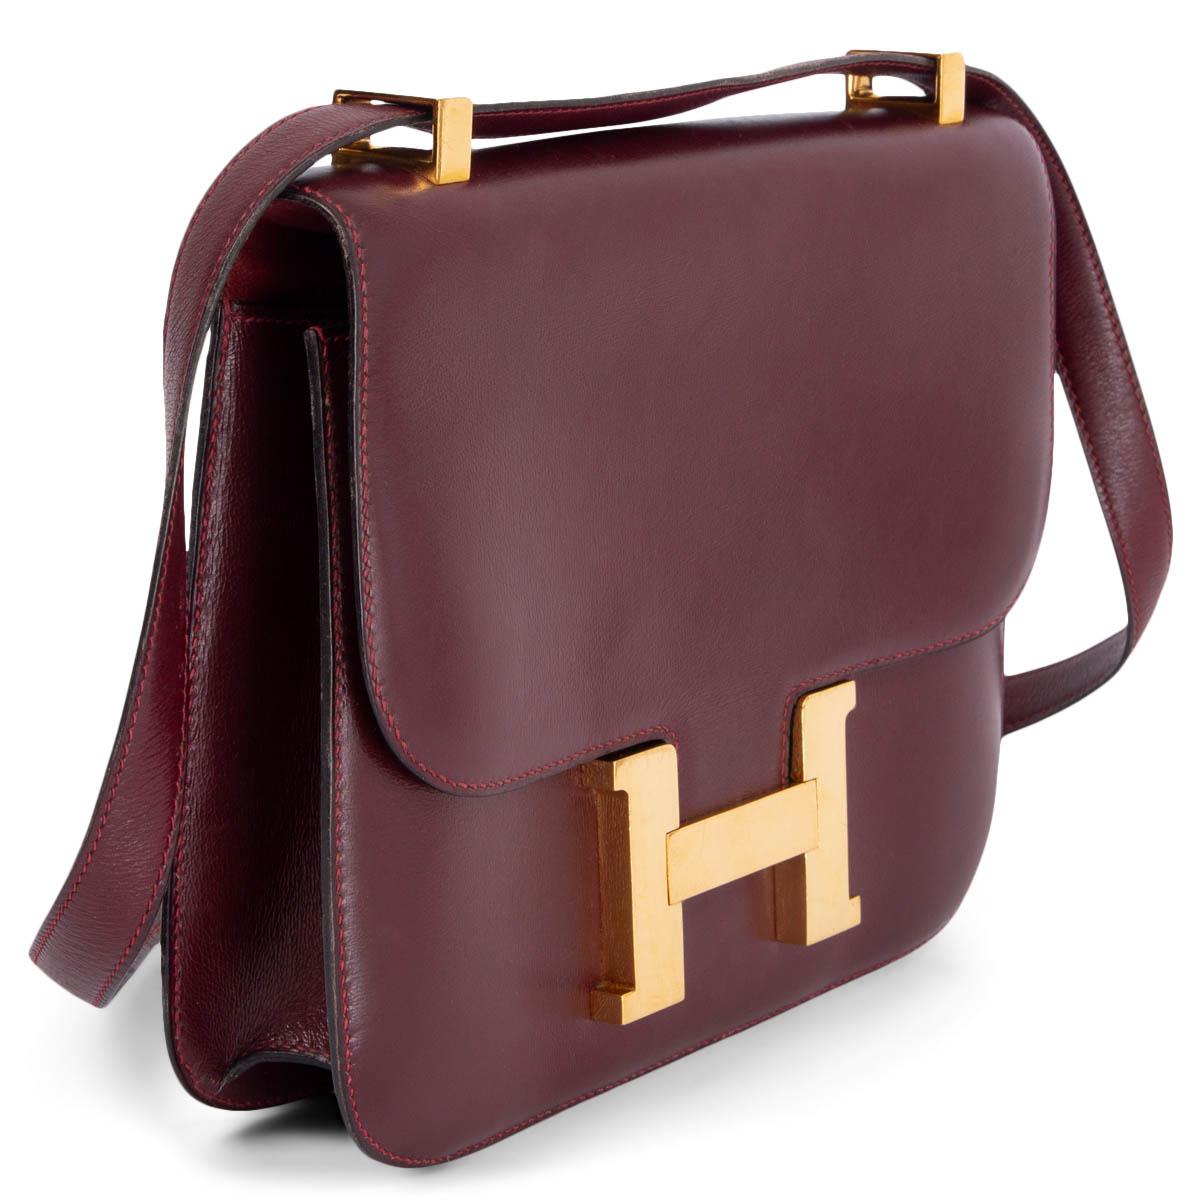 100% authentic Hermès Constance 23 shoulder bag in Rouge H Veau Box leather featuring gold-plated hardware. Vintage from 1976. Lined in burgundy lambskin with one zipper pocket against the back and one open pocket against the front. Has been carried